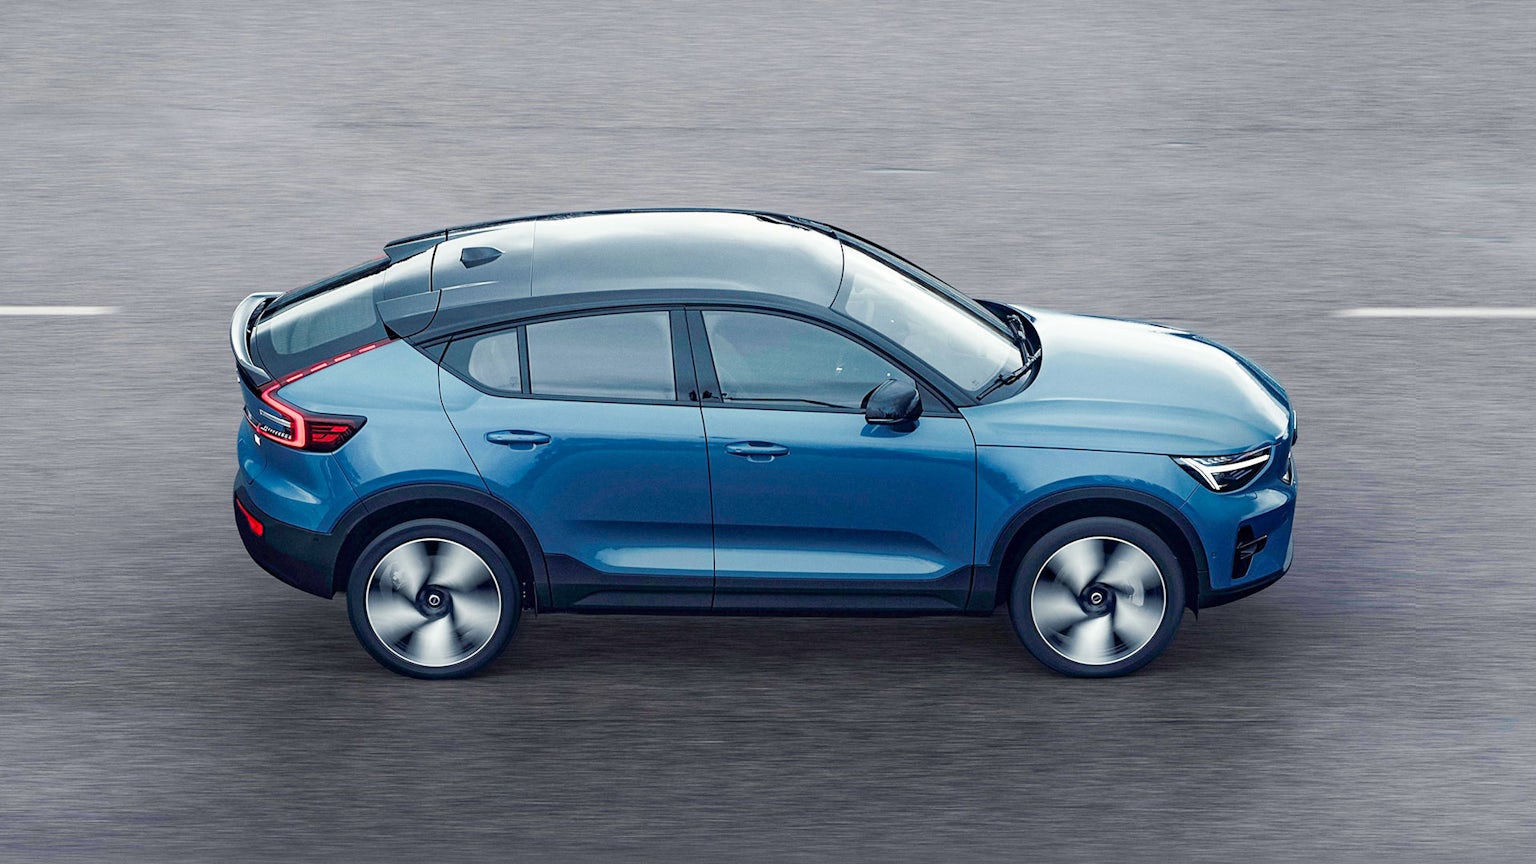 Volvo C40 Recharge electric car now on sale price and specs revealed